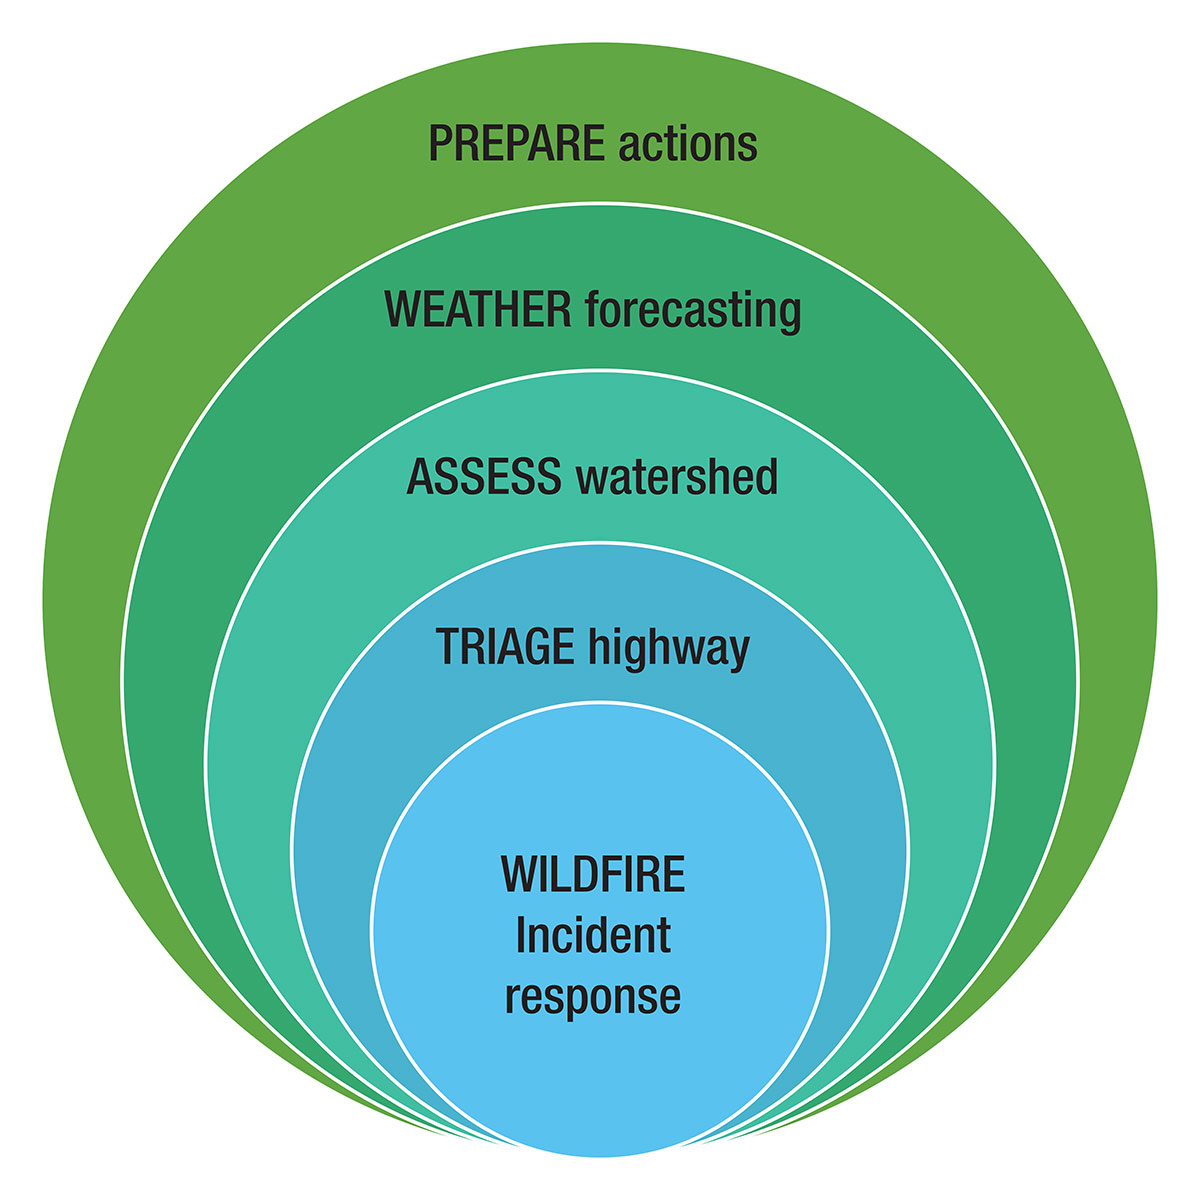 Infographic: Diagram showing the steps of PREPARE- Wildfire Incident Response, Triage Highway, Assess Watershed, Weather Forecasting, and PREPARE Actions.